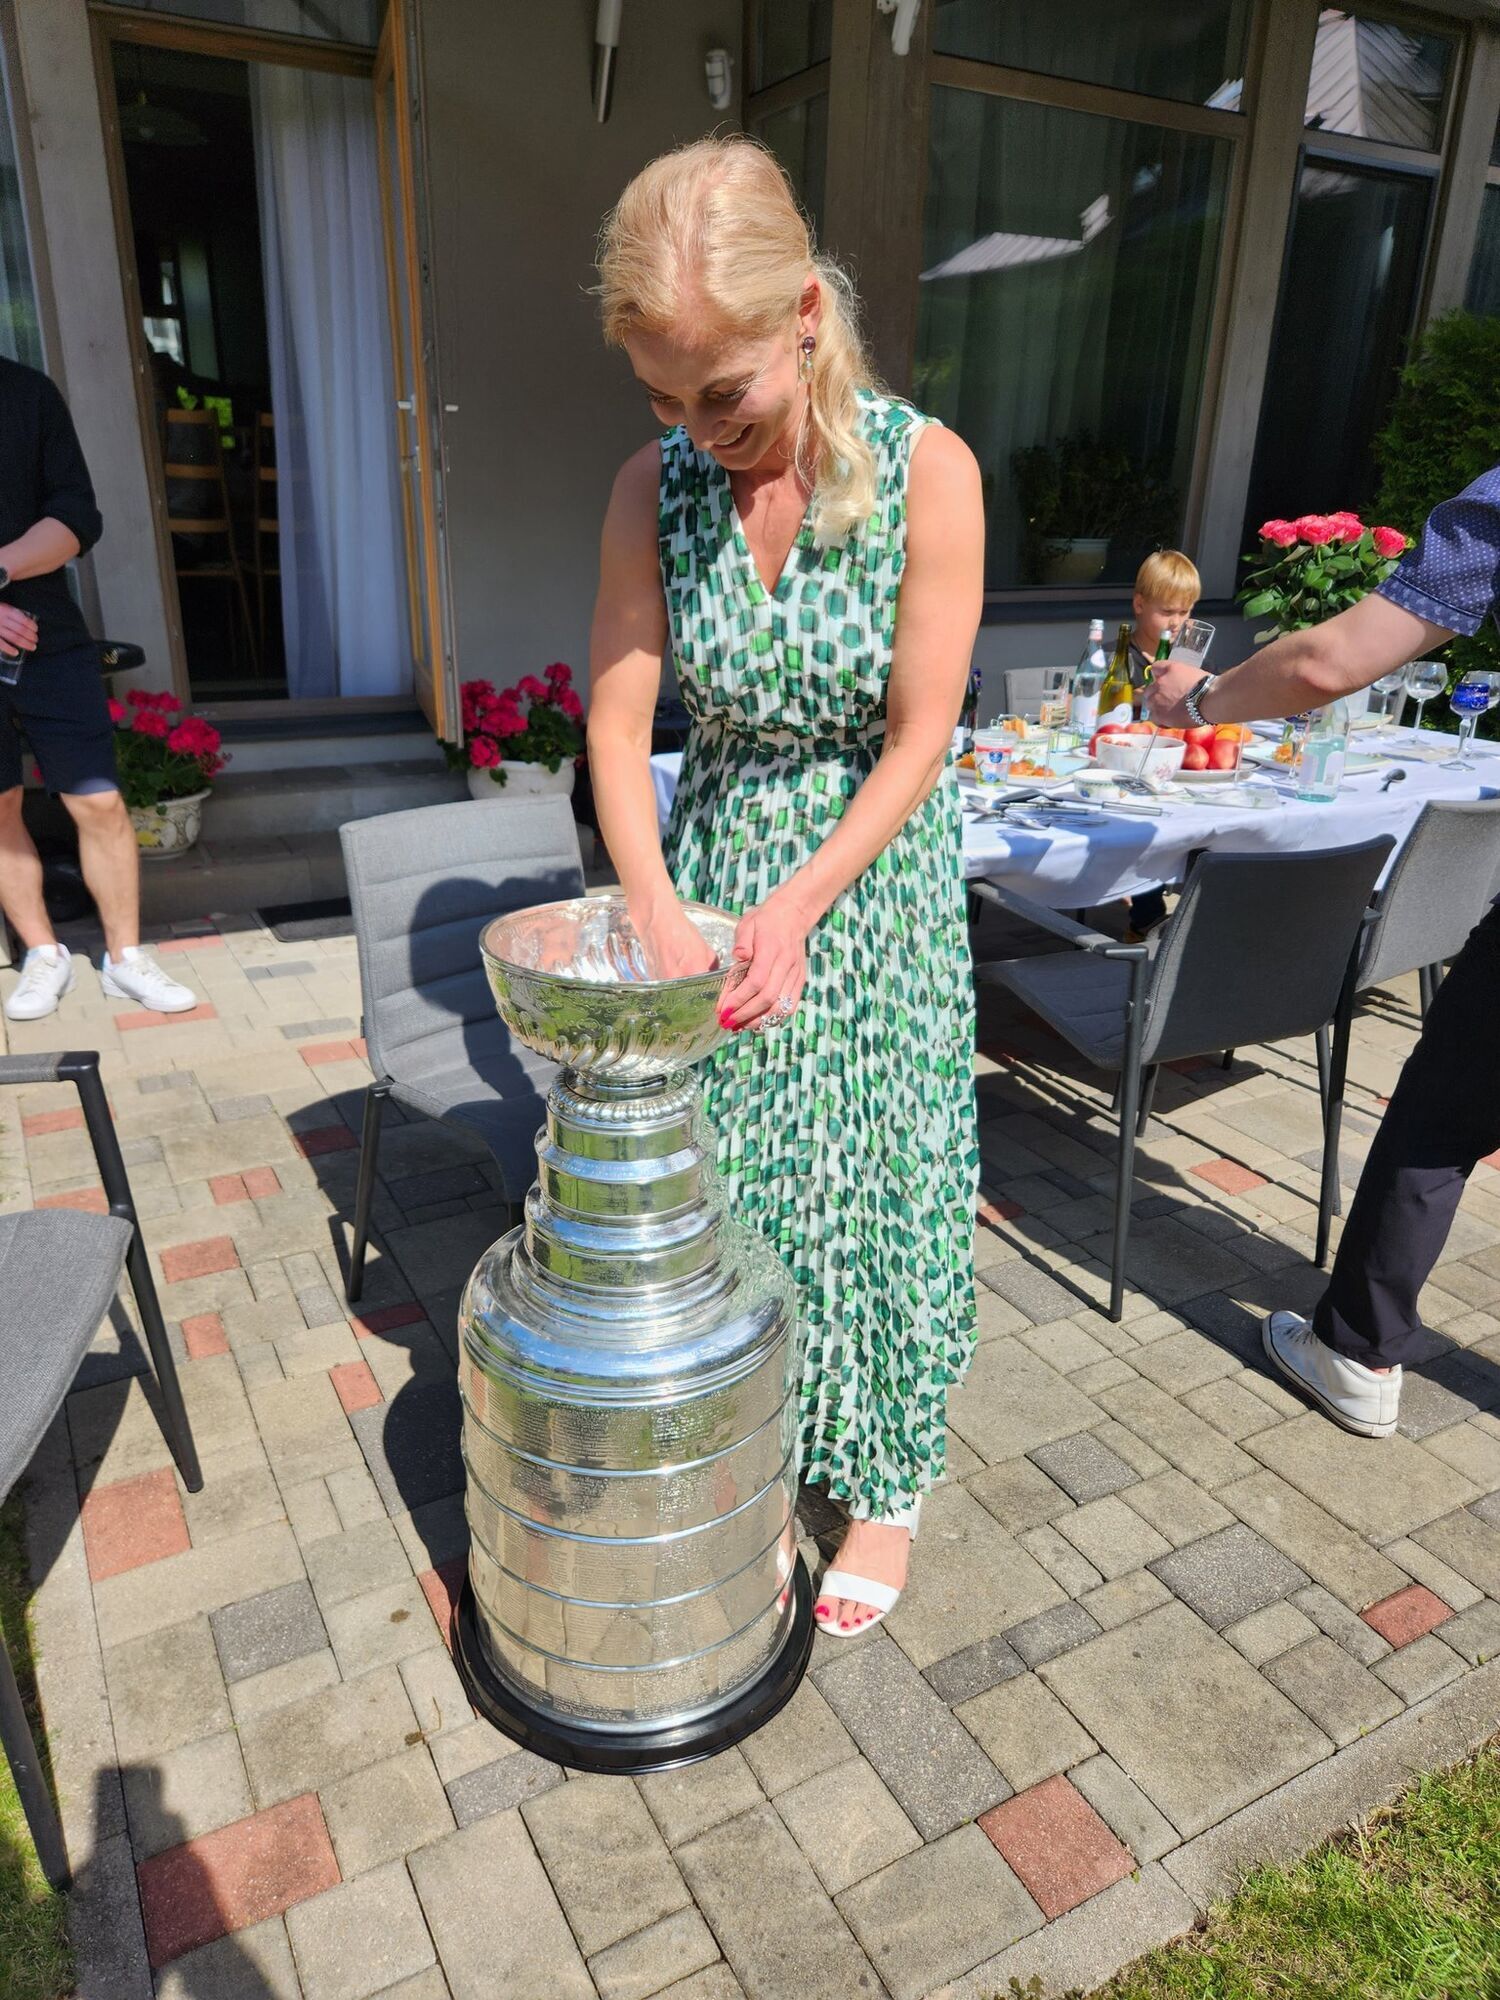 The NHL champion ate Ukrainian borscht from the Stanley Cup. Photo fact